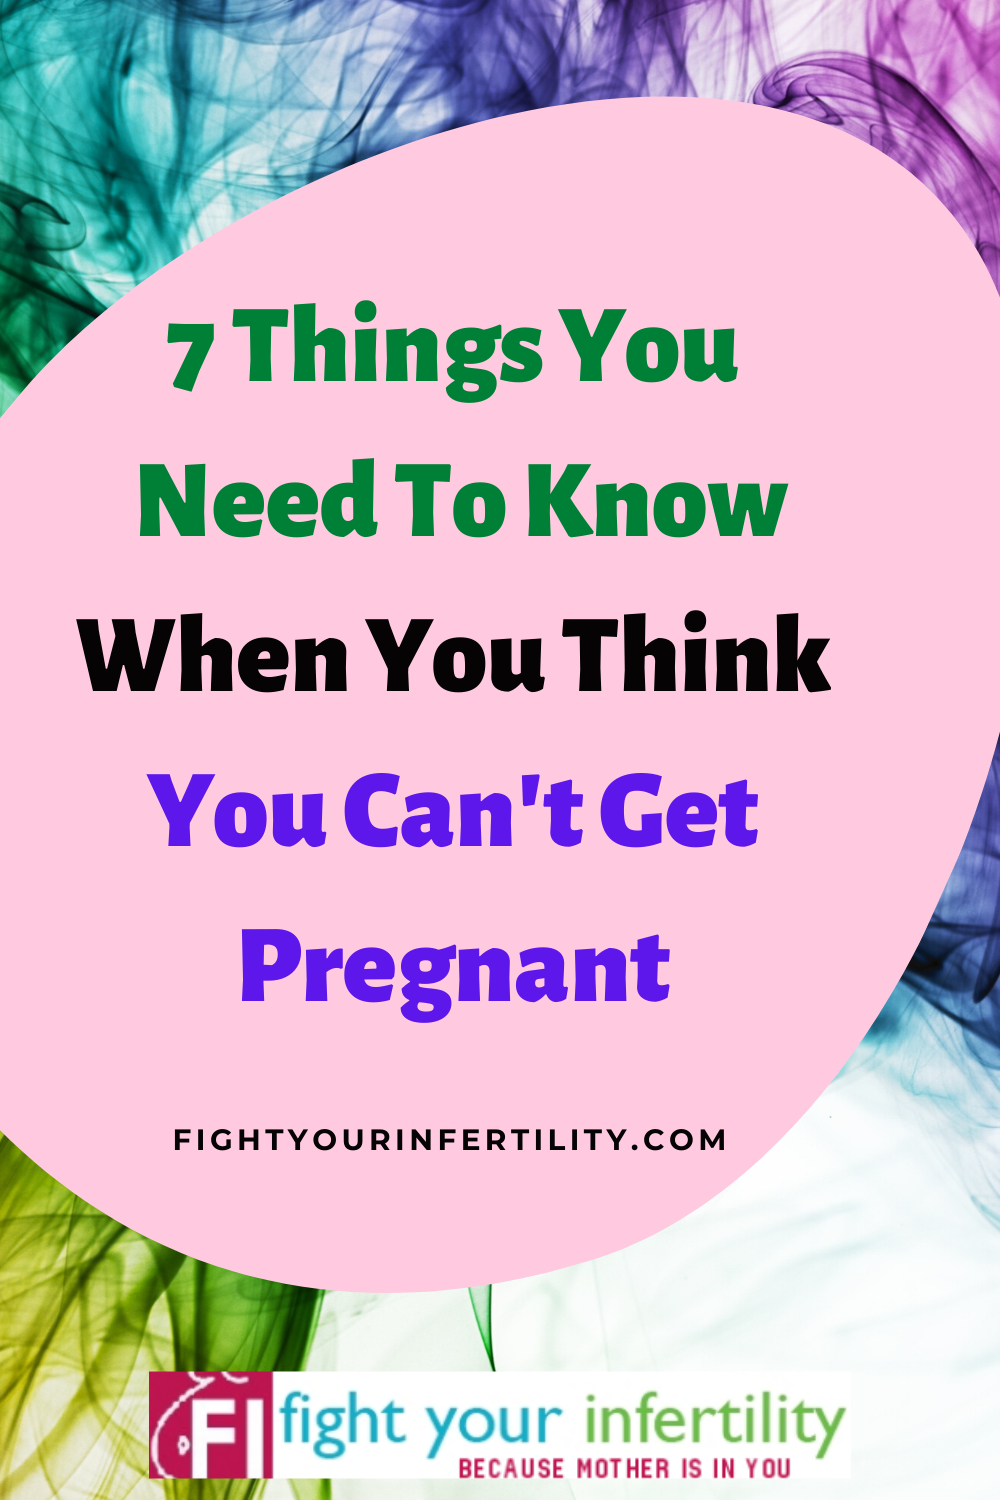 7 Things You Need To Know When You Think You Can't Get Pregnant